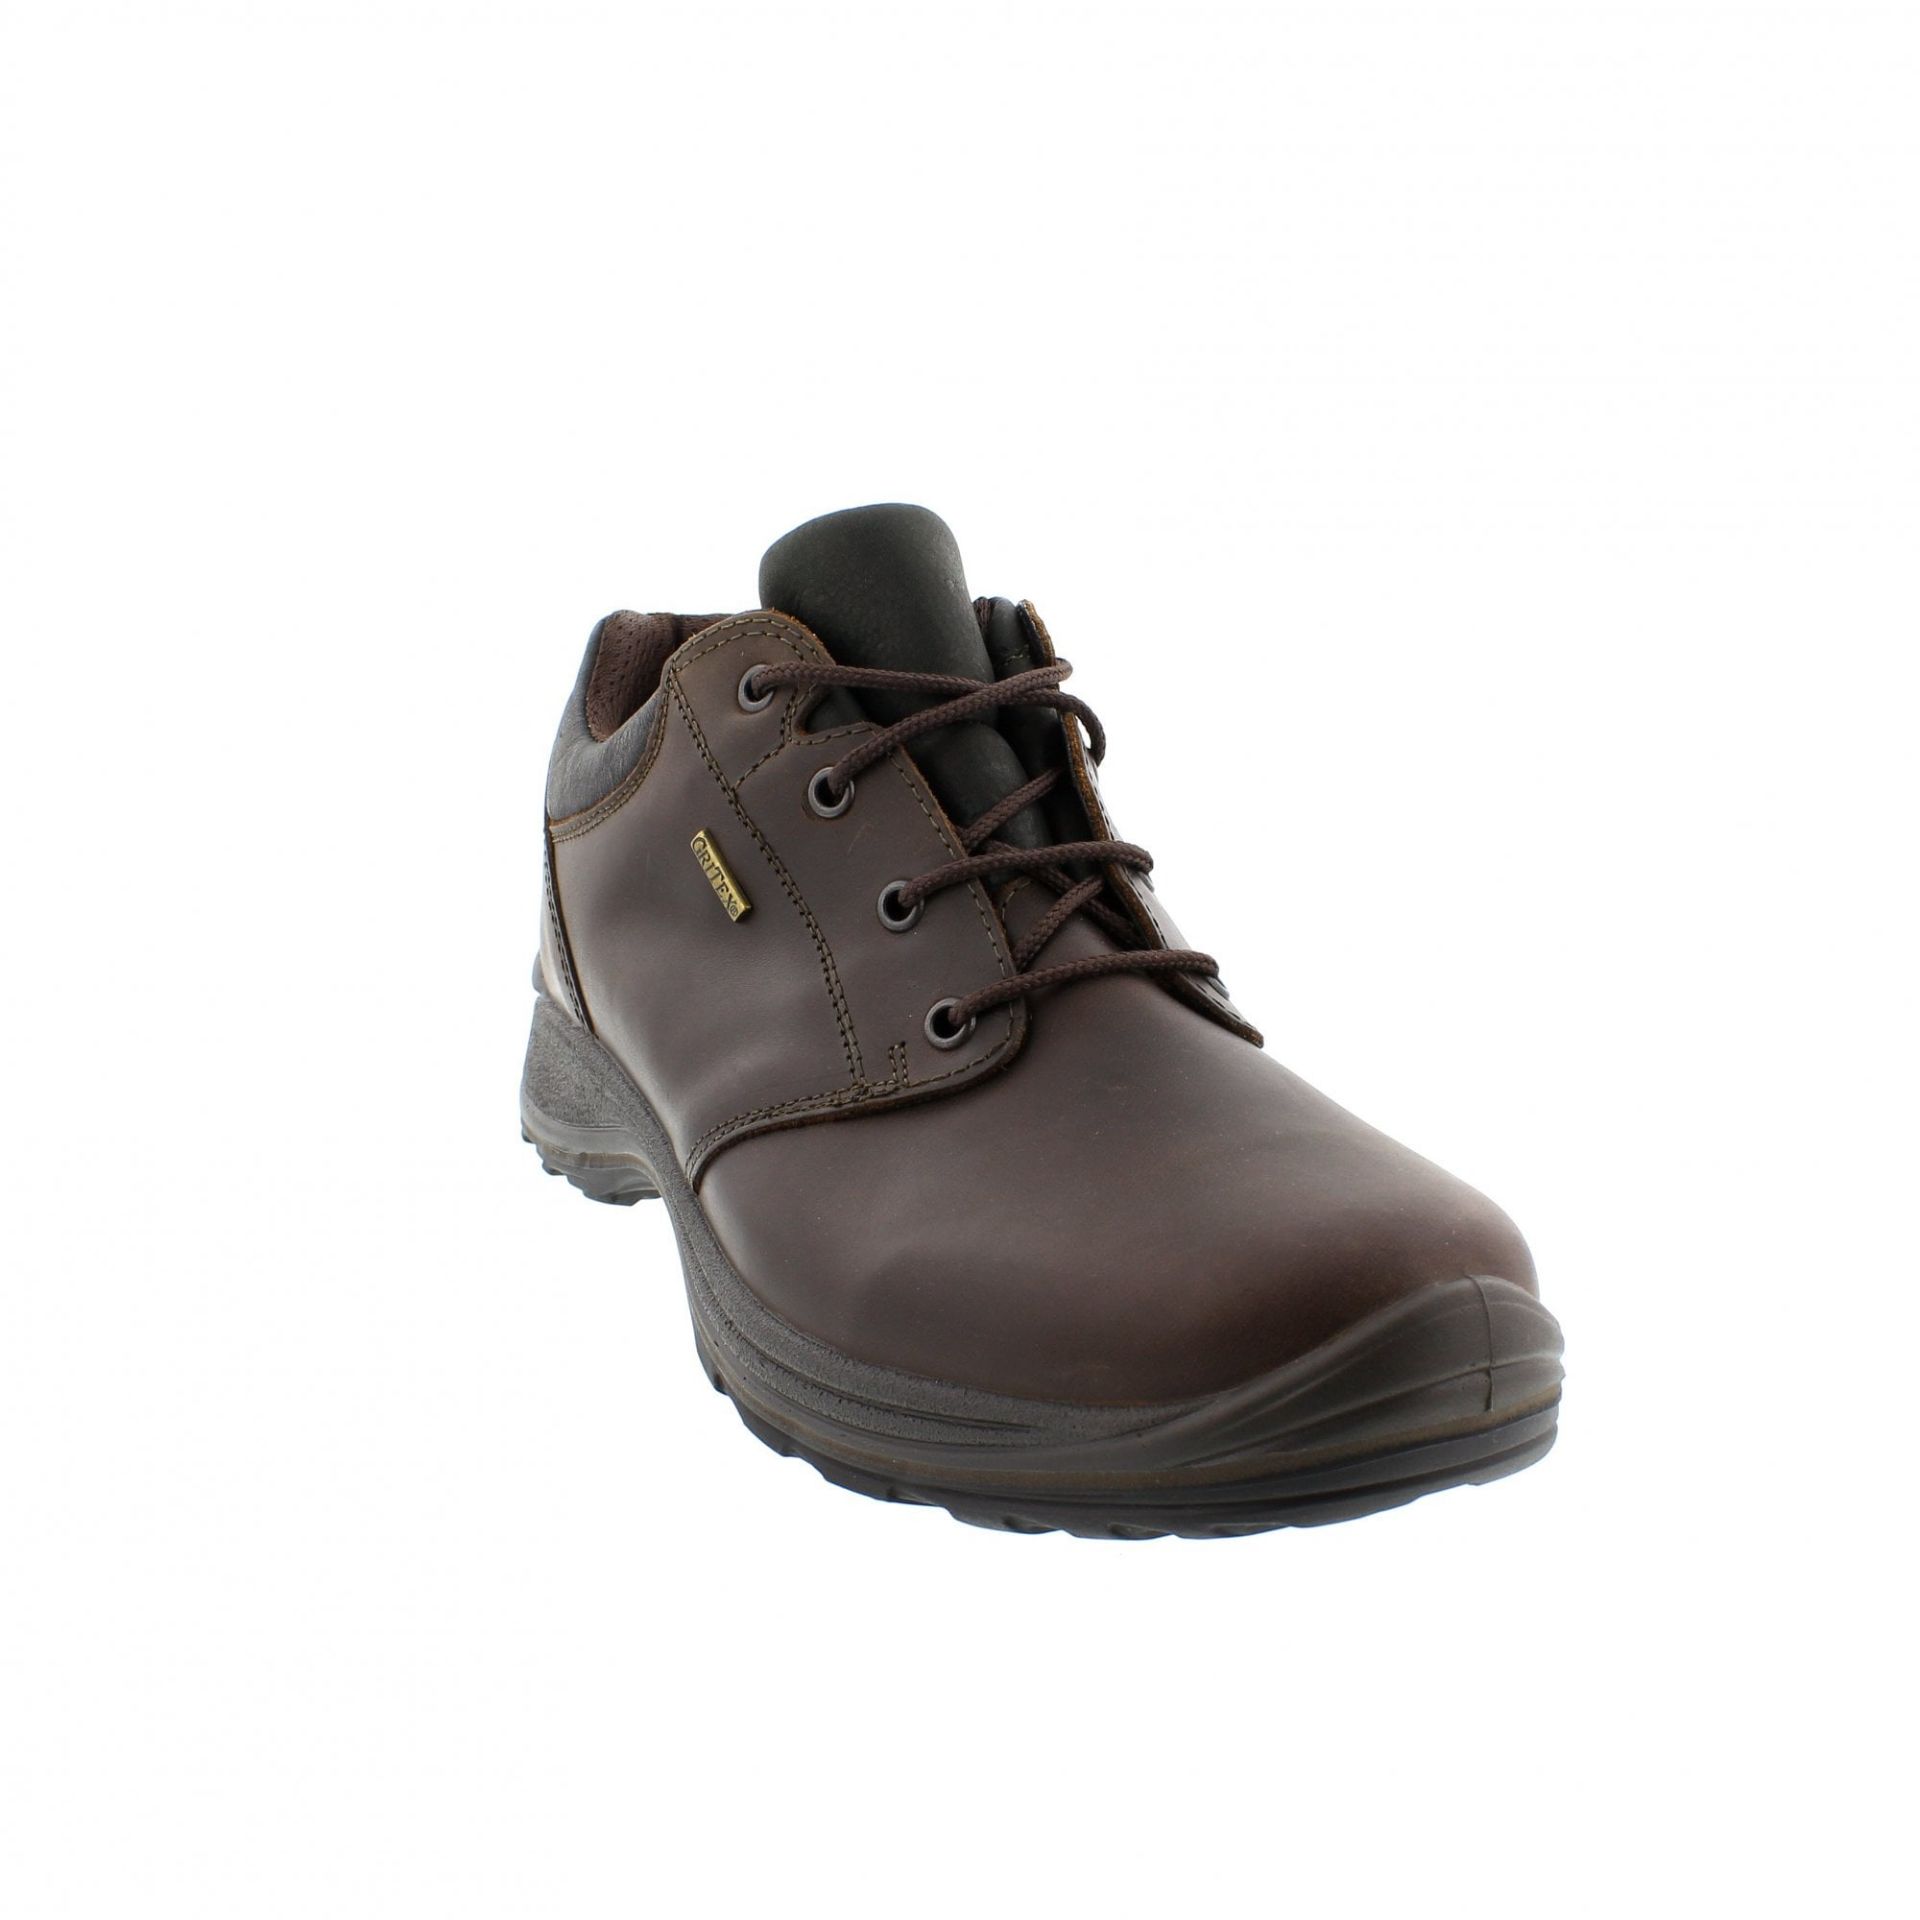 1 x Pair of Men's Grisport Brown Leather GriTex Shoes - Rogerson Footwear - Brand New and Boxed - - Image 3 of 9